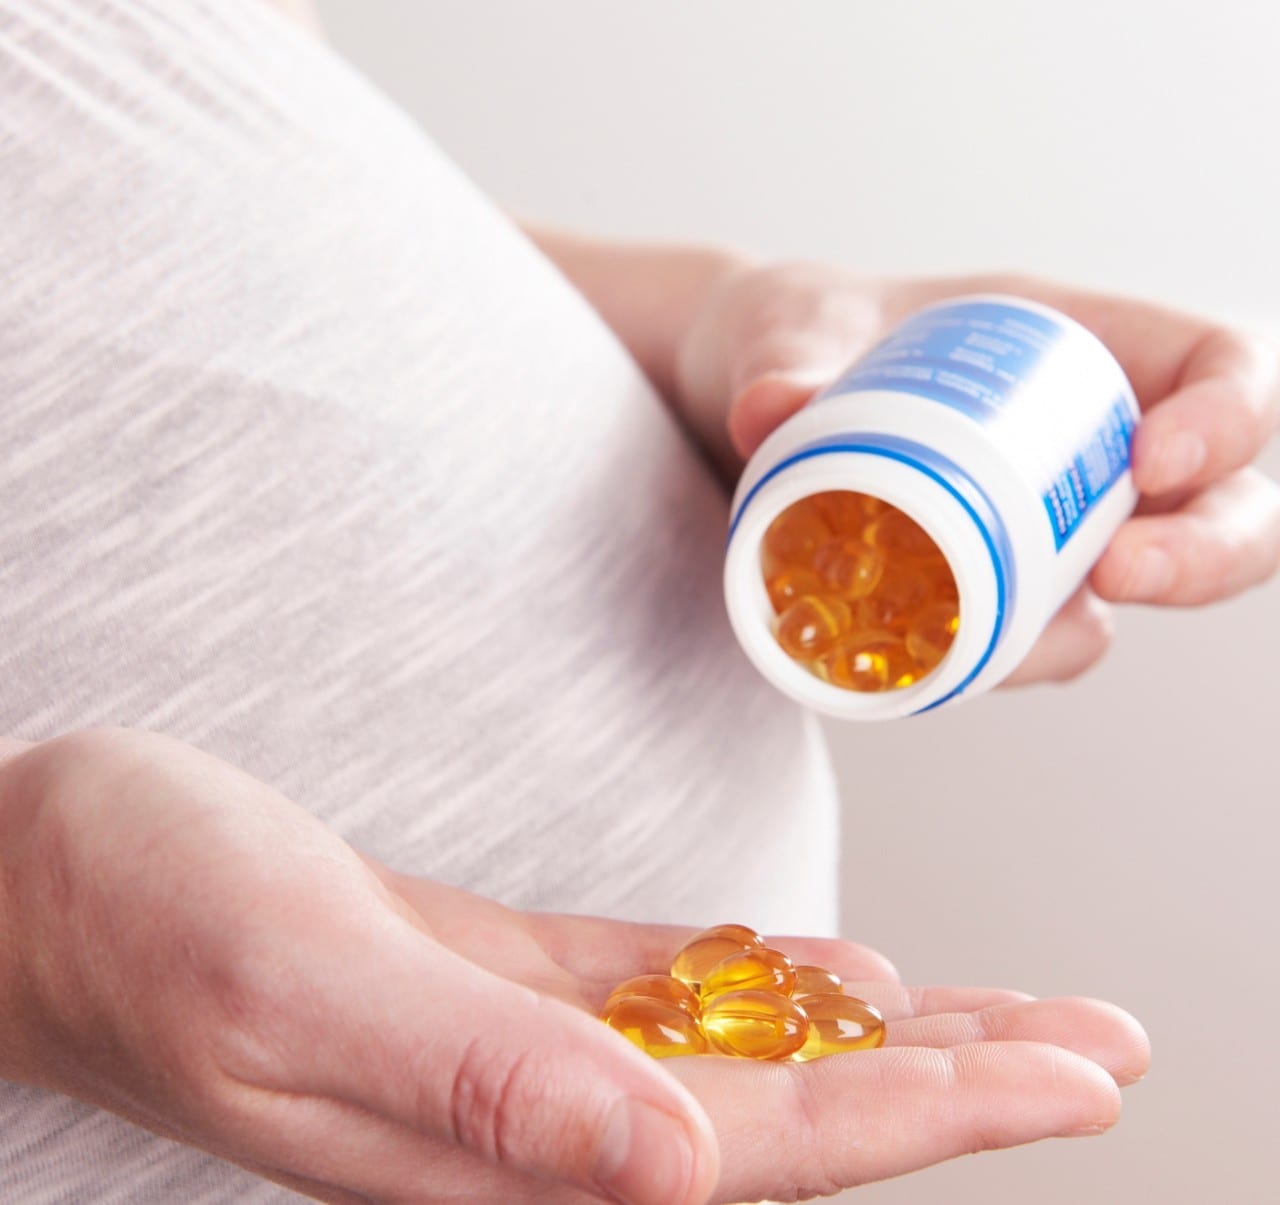 Supplements to help both mother and baby